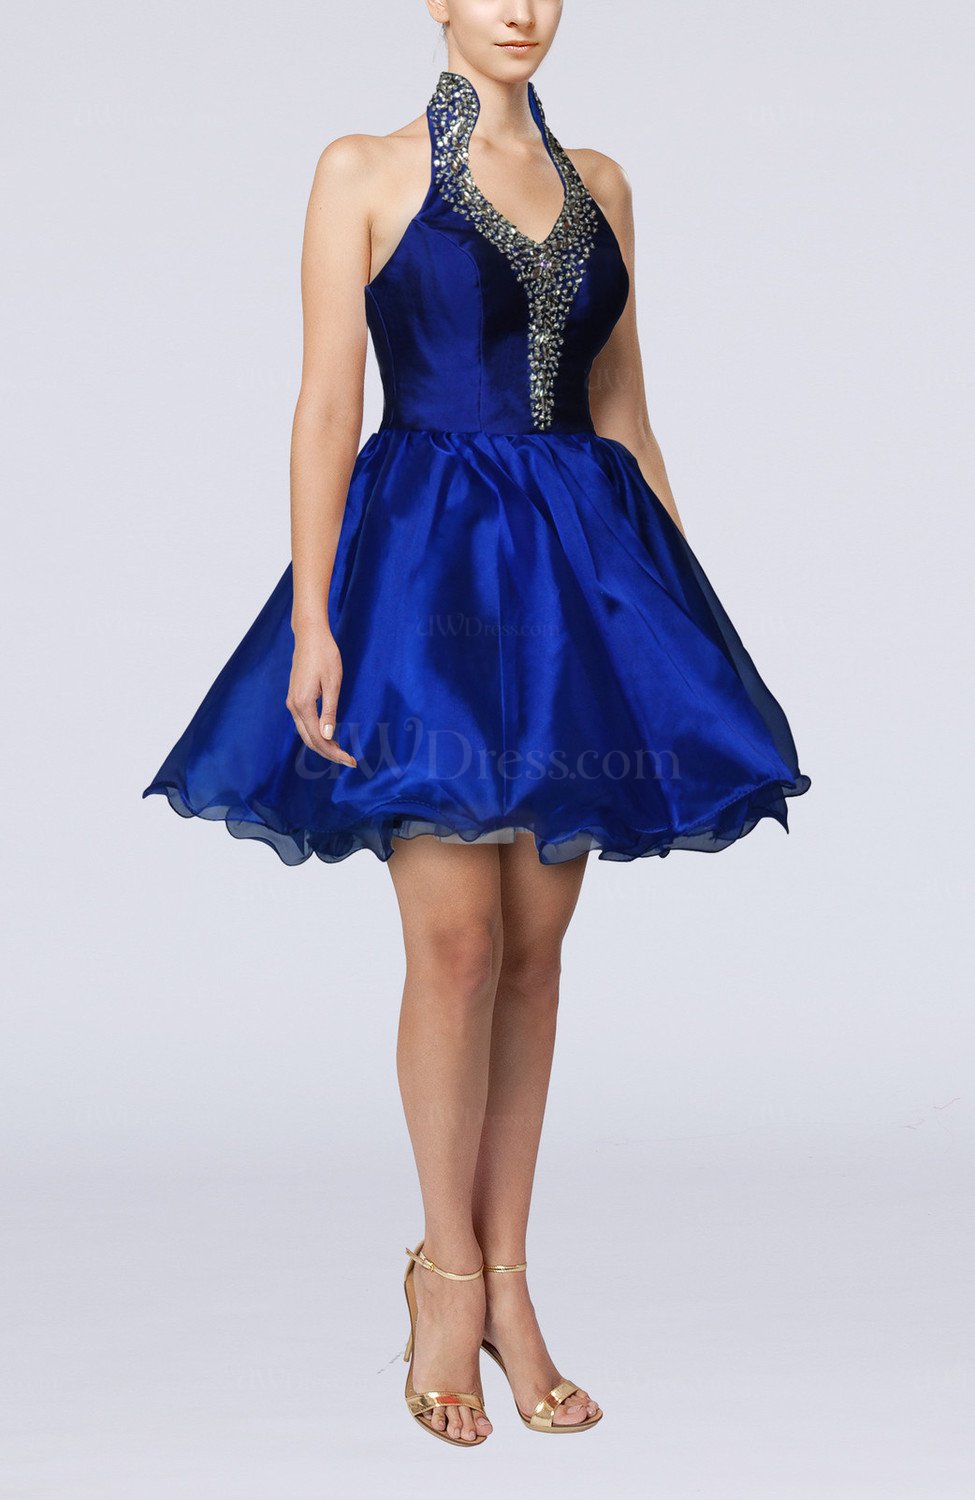 Royal Blue Cute Baby Doll Sleeveless Backless Short Party Dresses